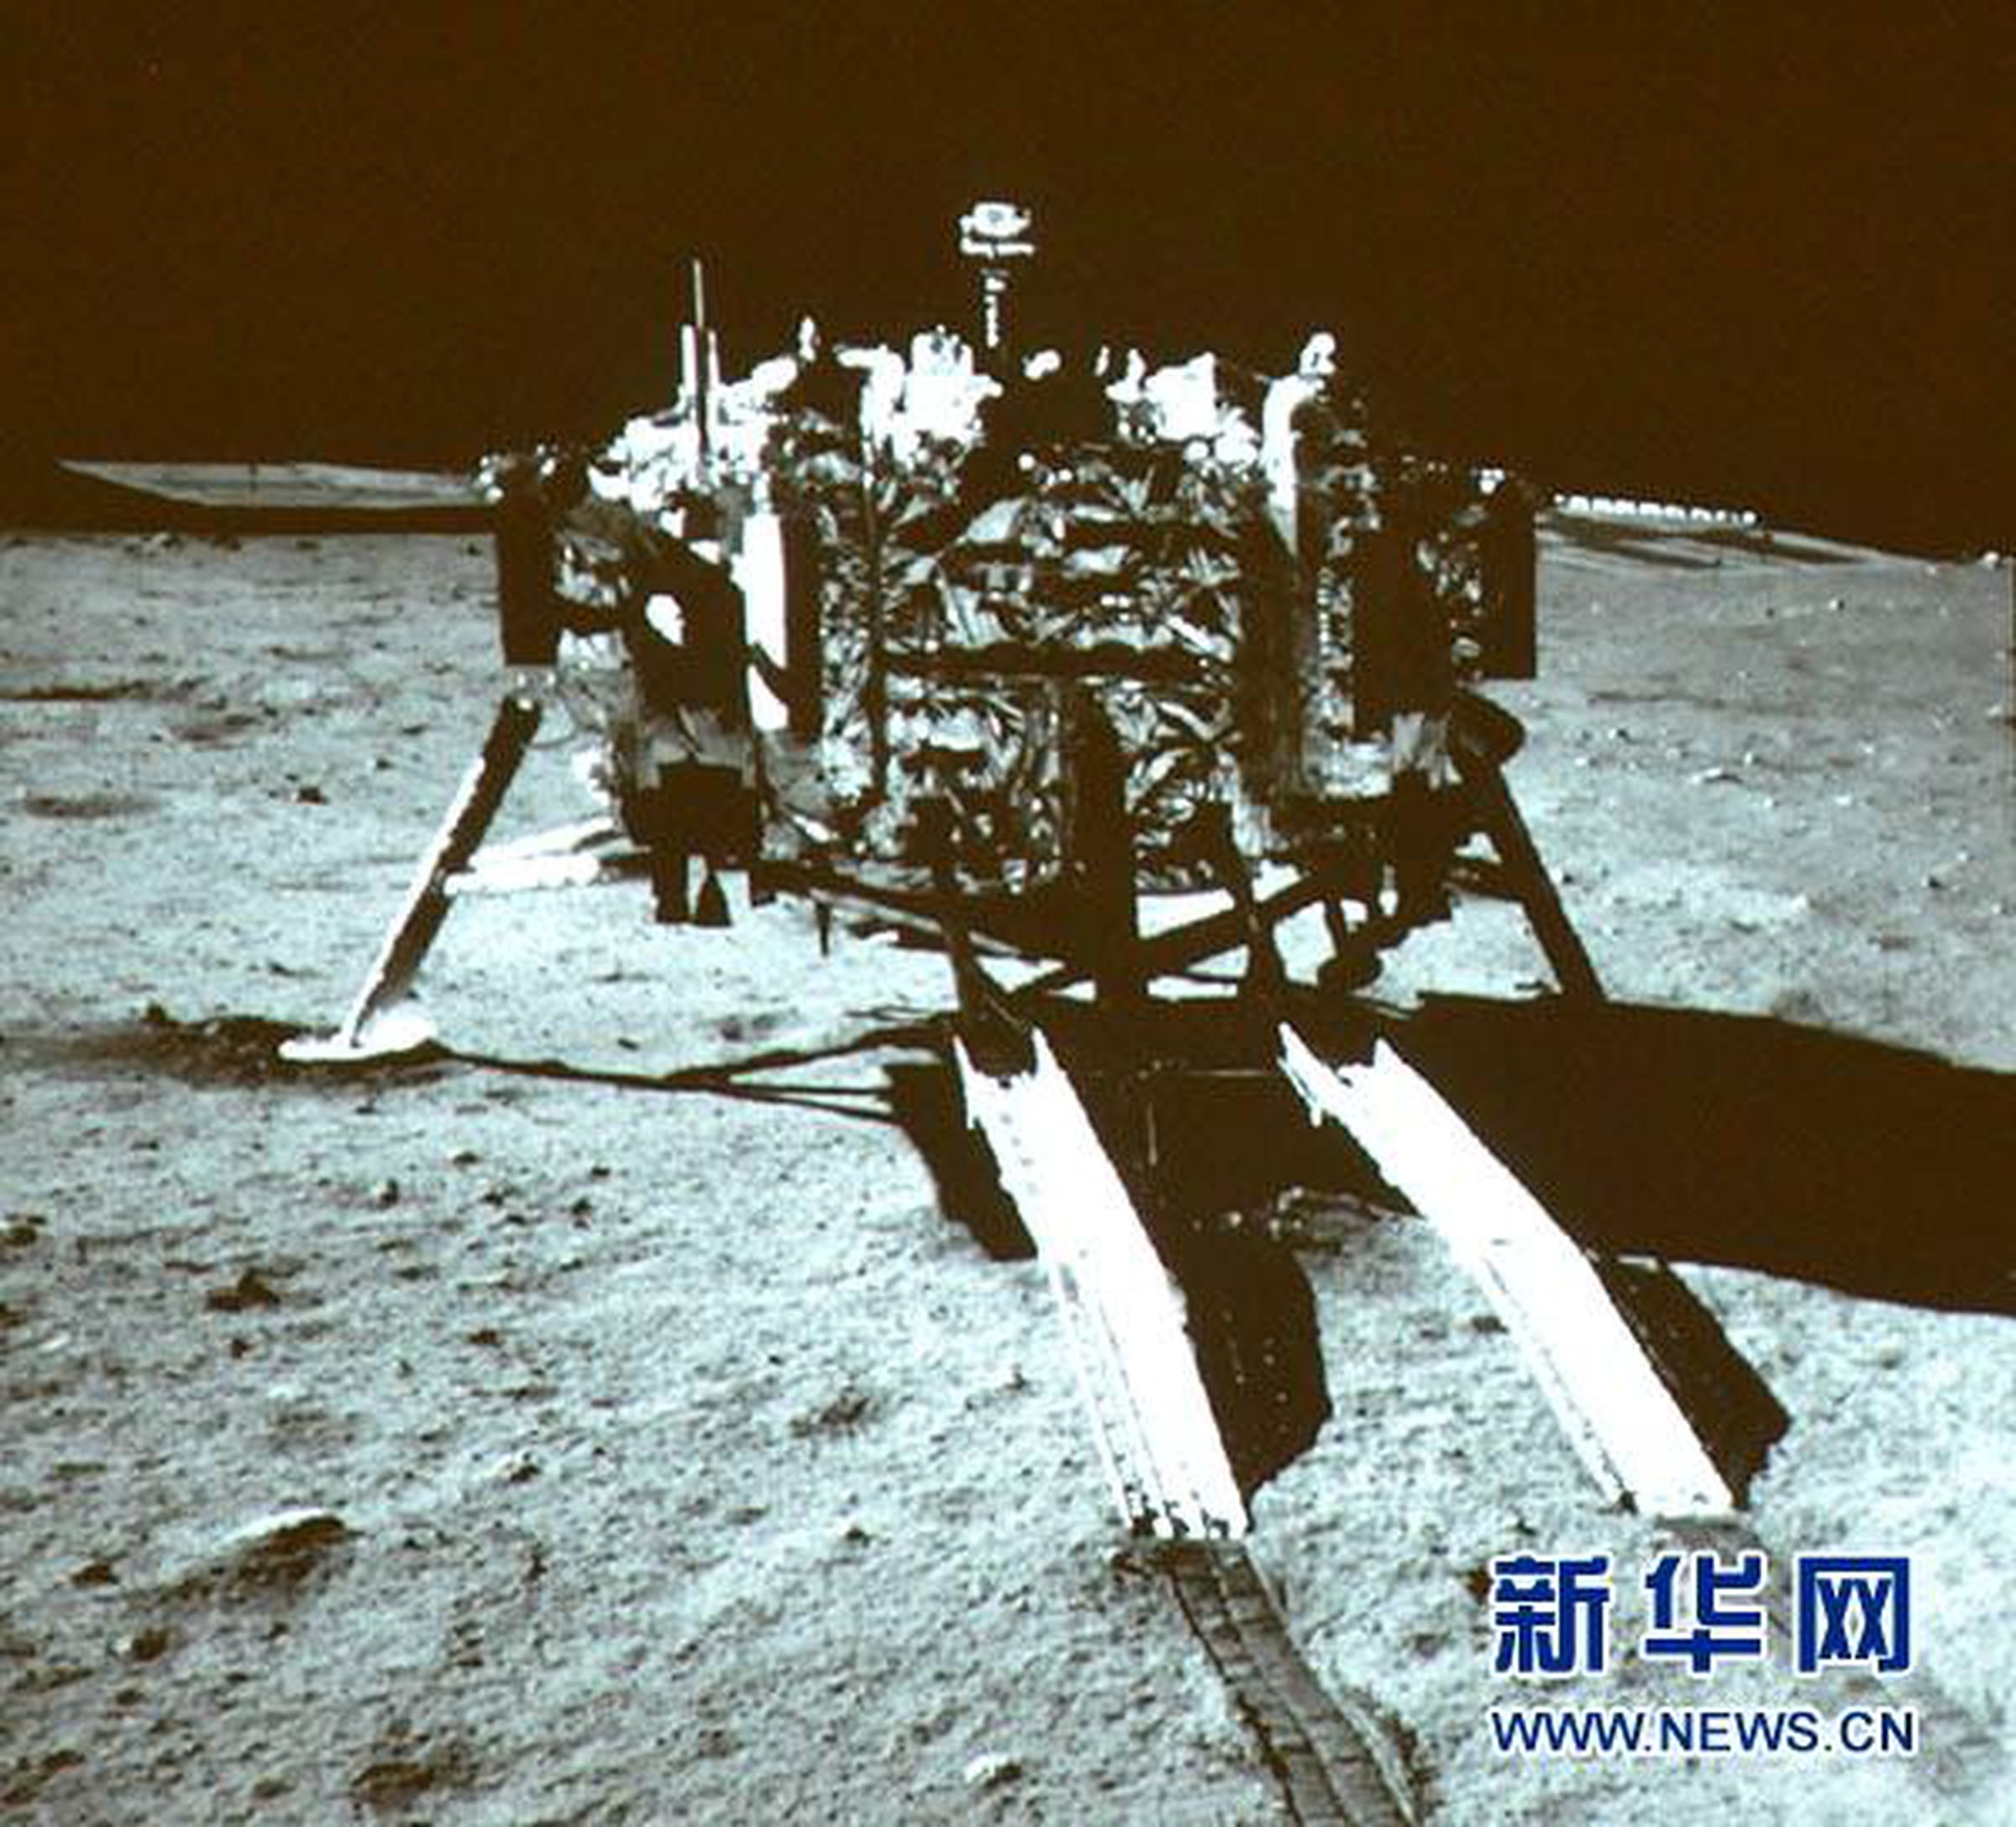 The first photos from China's moon mission